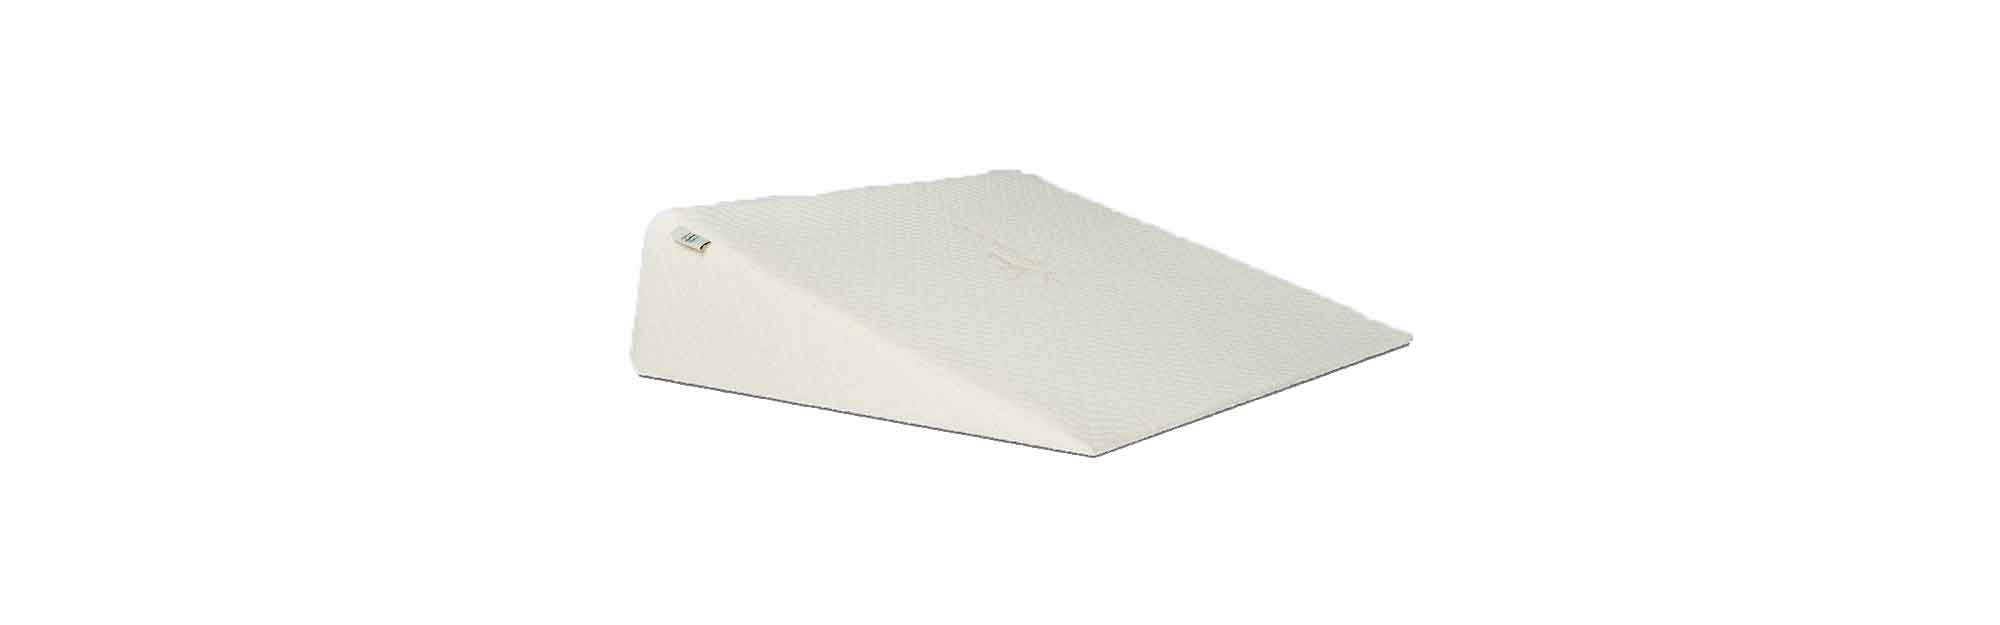 A Wedge Pillow for Back Pain (And Some Other Tips) • Wedge Pillow Blog